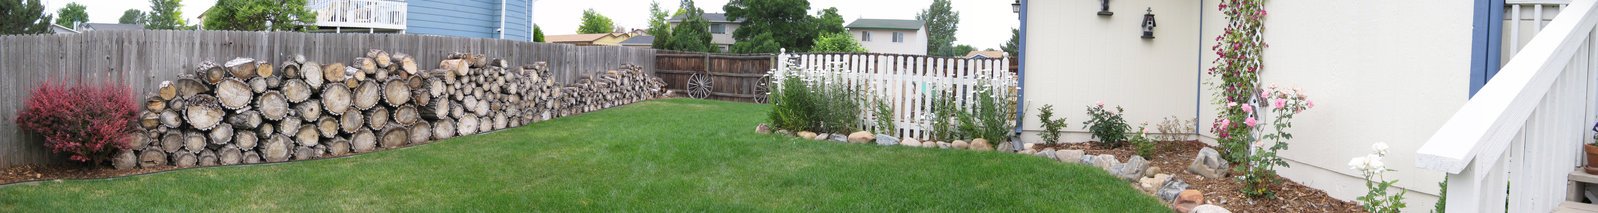 the backyard has wooden fencing and green lawn